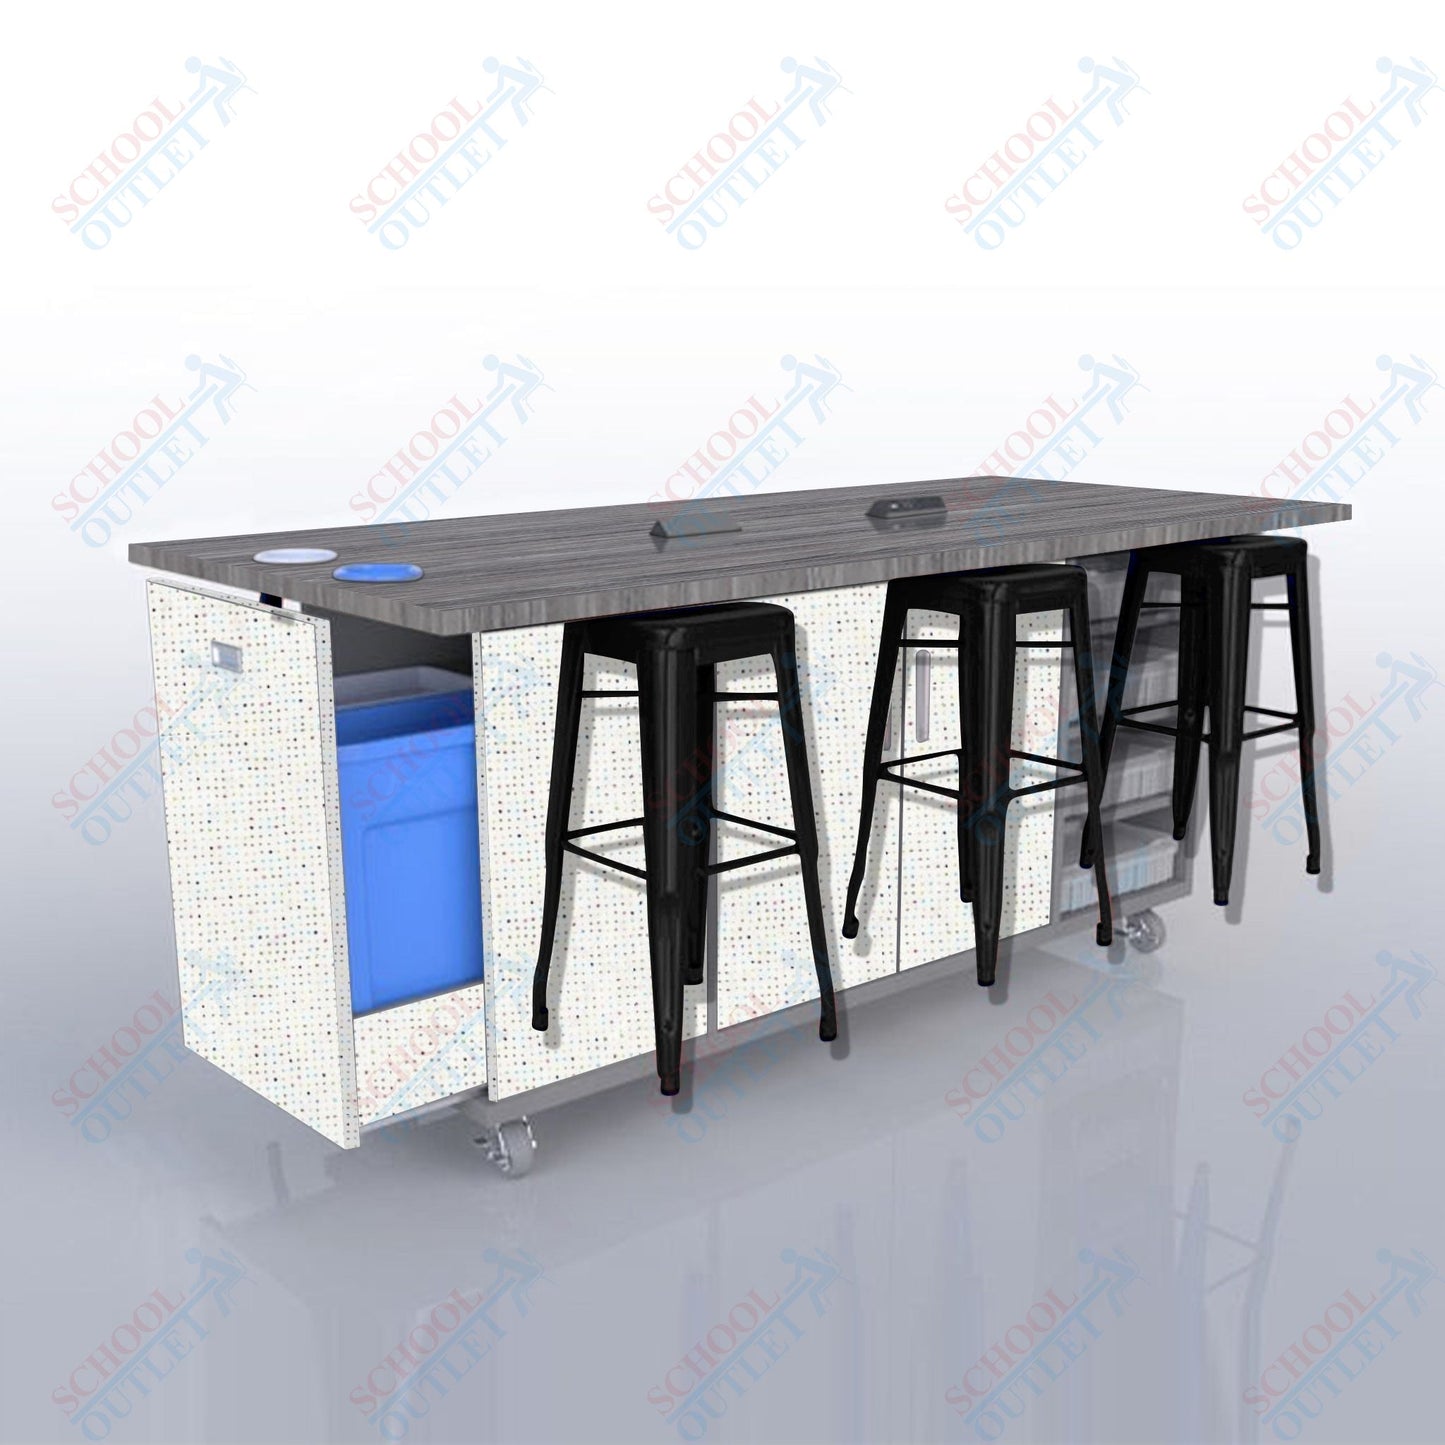 CEF ED Original Table 36"H High Pressure Laminate Top, Laminate Base with  6 Stools, Storage Bins, Trash Bins, and Electrical Outlets Included.